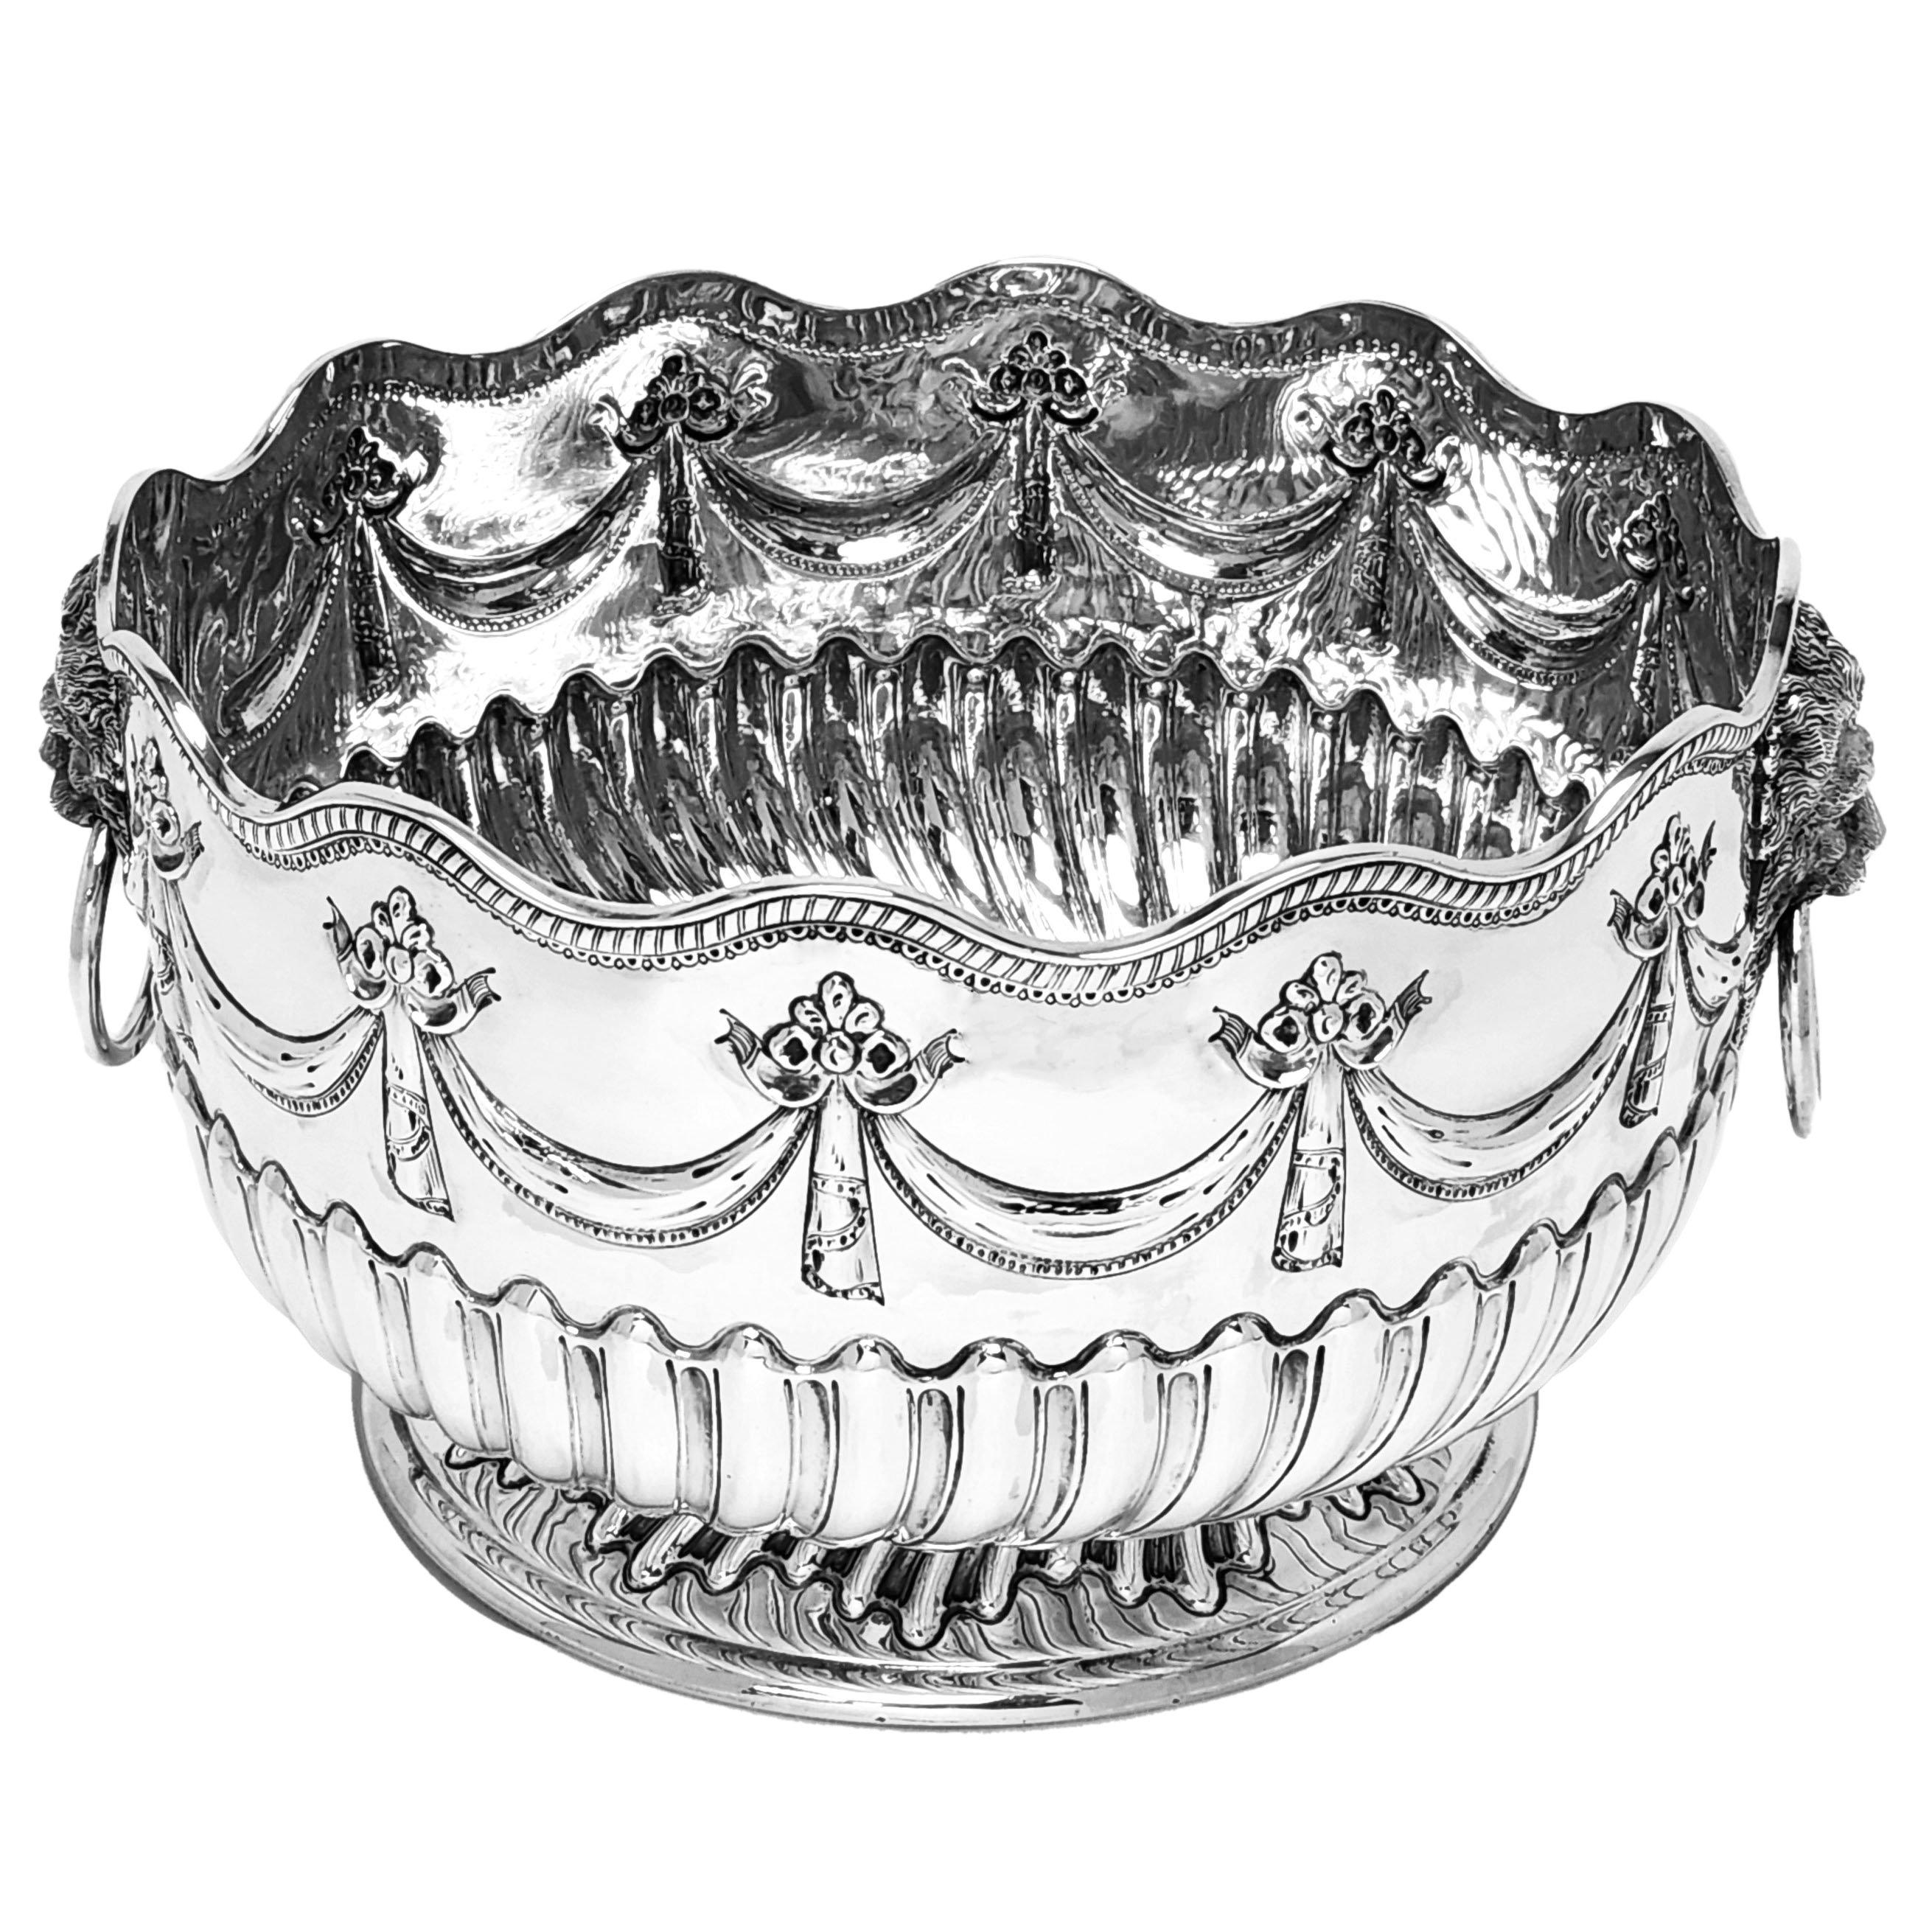 An Antique Victorian Solid Silver Bowl decorated with elegant chased designs. The lower half of the Antique Bowl show a chased writhen fluted design with a swag and floral chased and above this. This Bowl has a pair of impressive Lion Head Ring